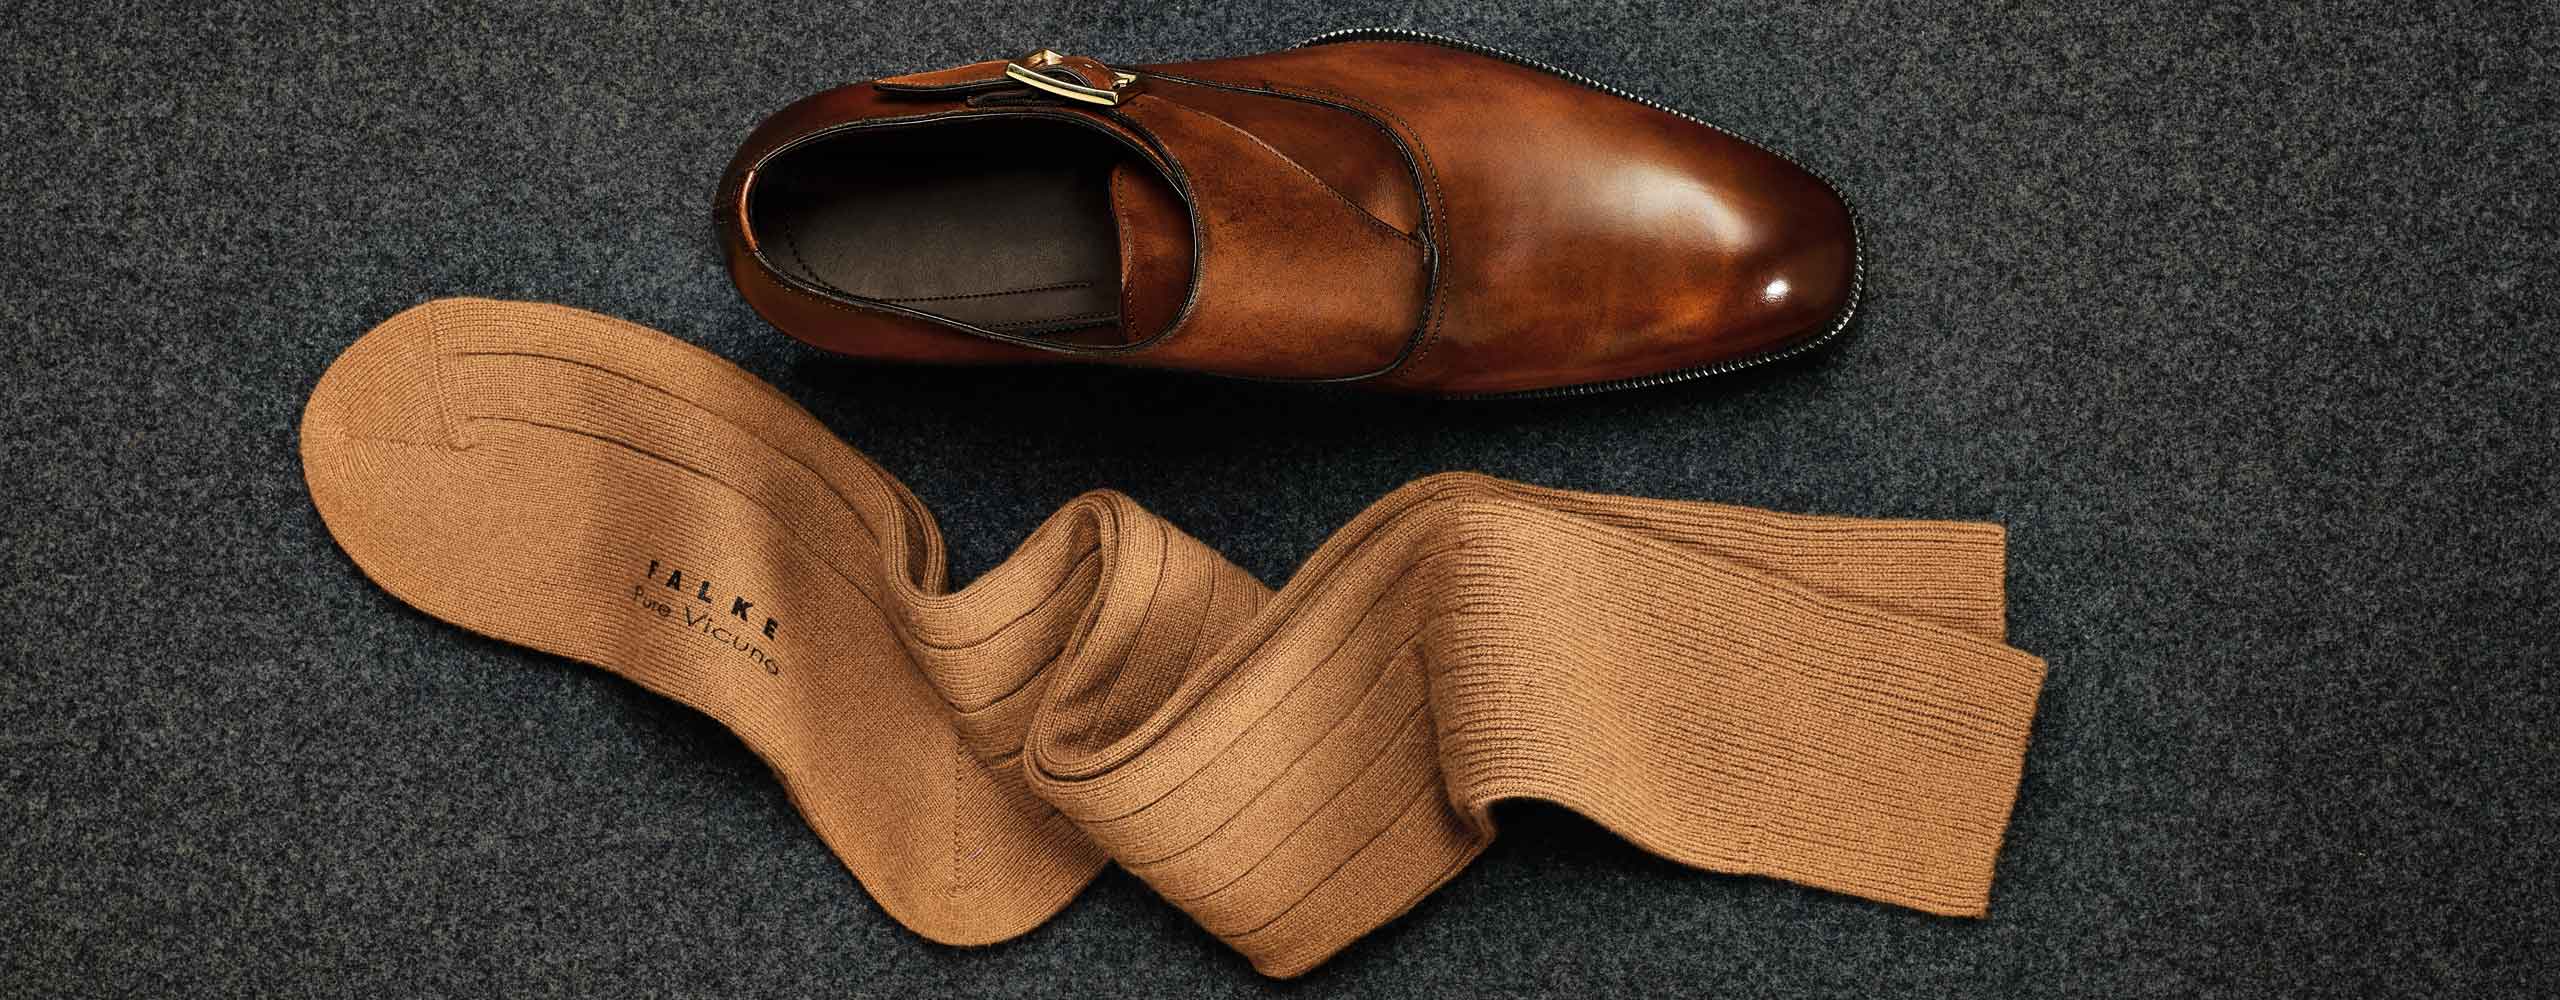 A pair of Falke golden brown sock and a brown shoe